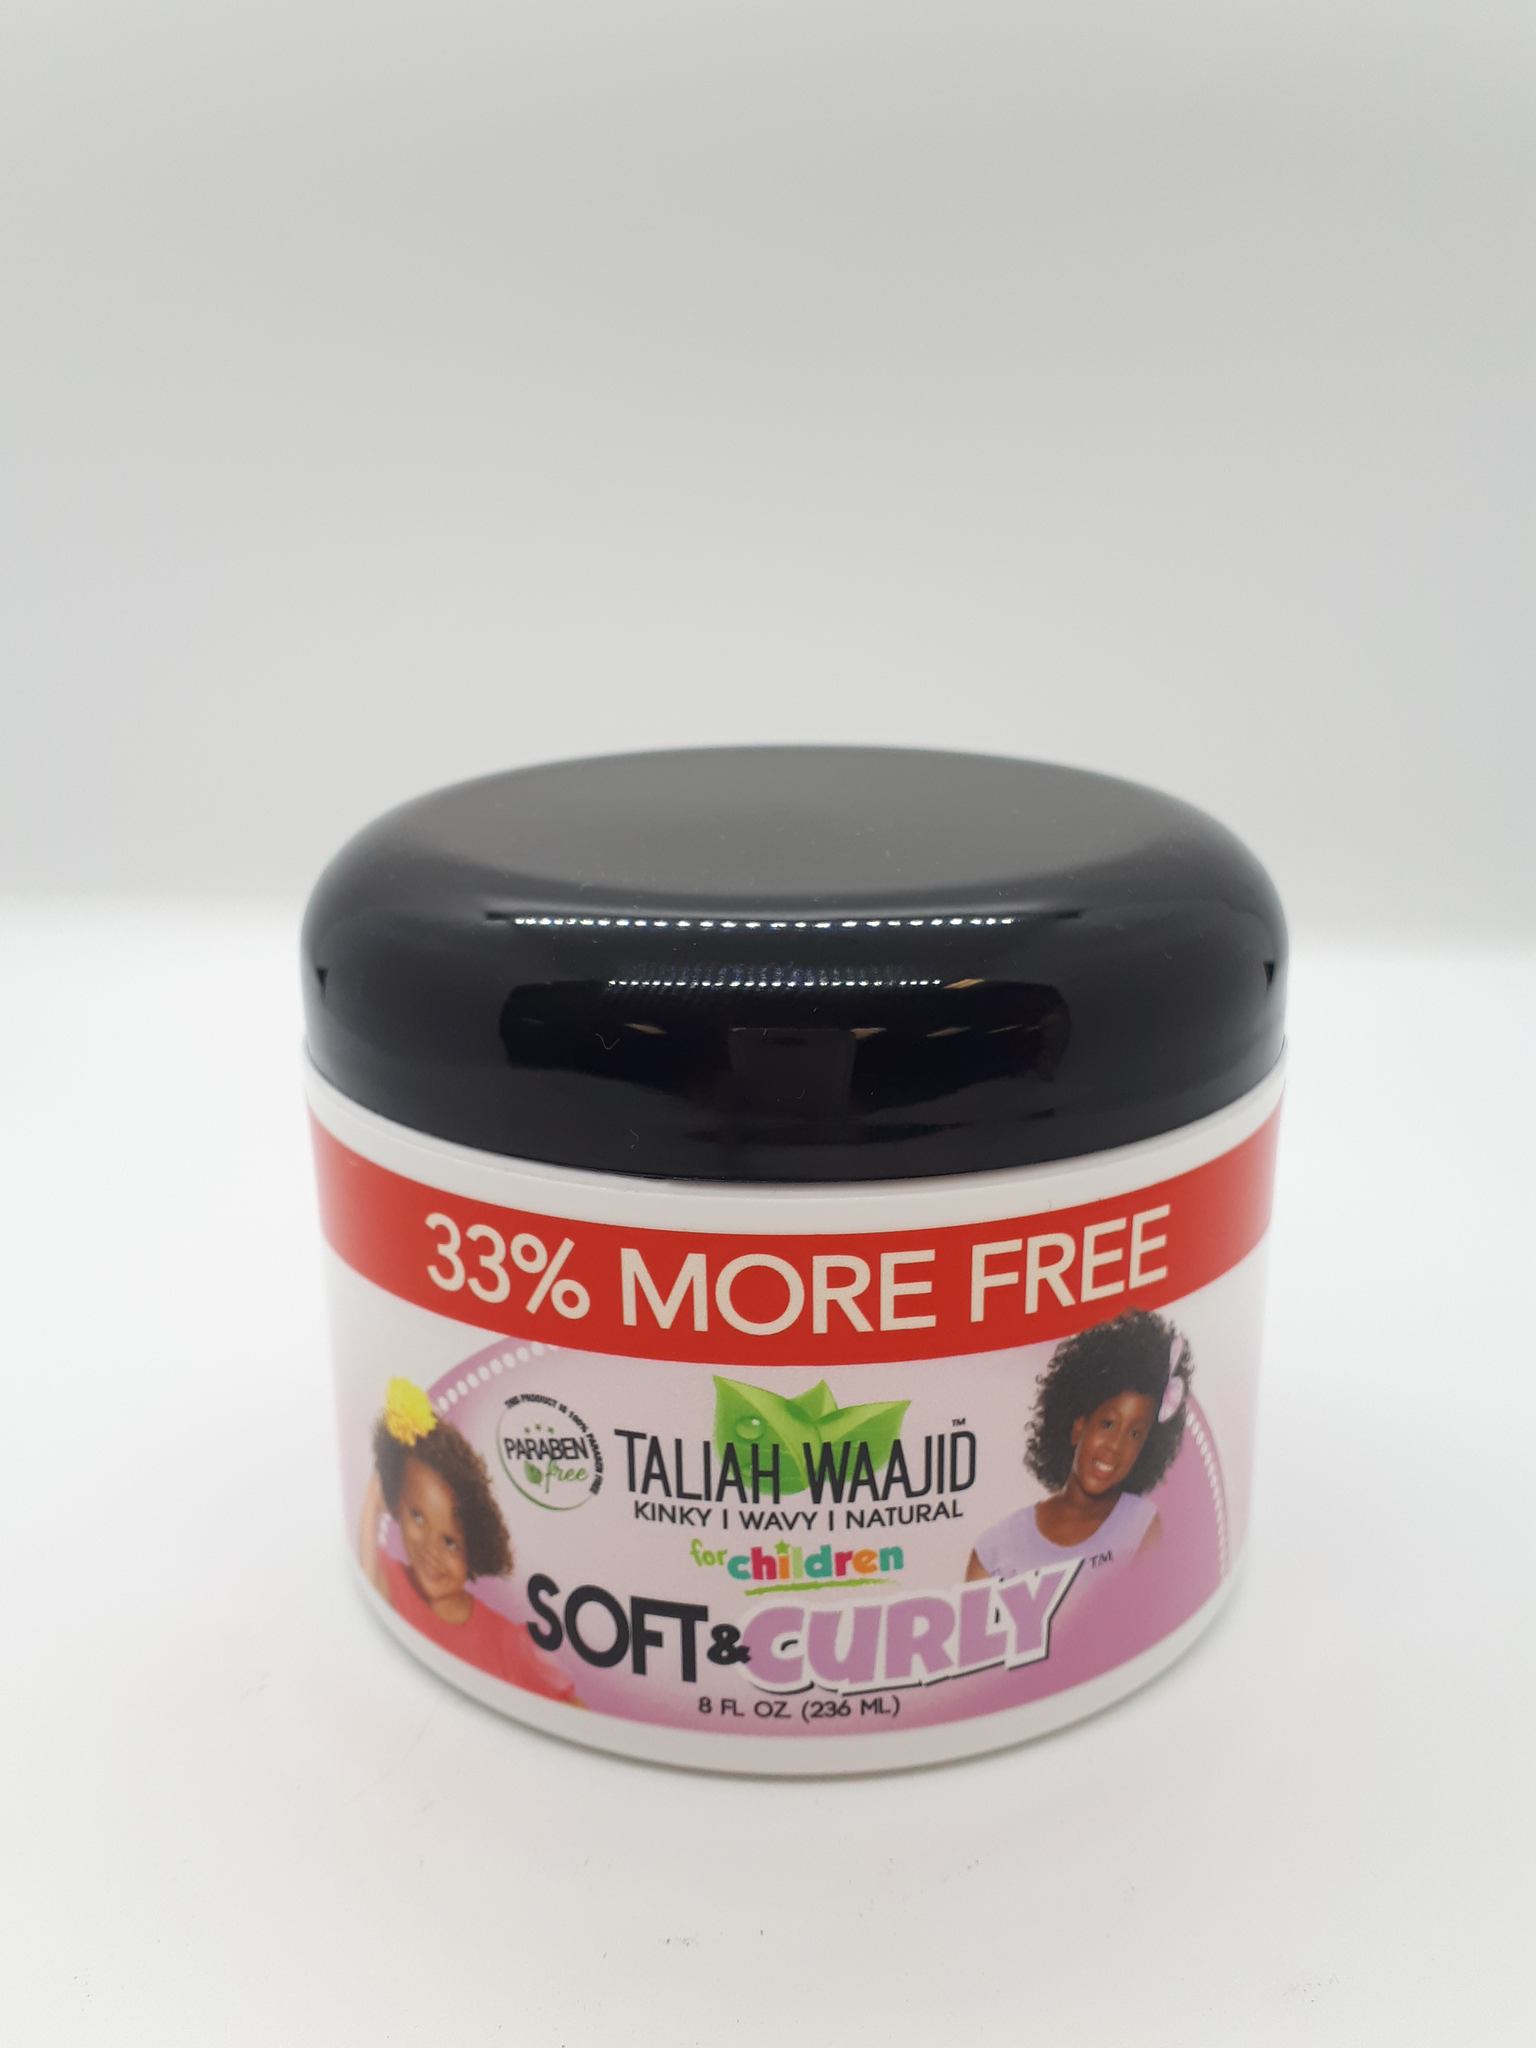 Soft & Curly For Natural Hair 6oz